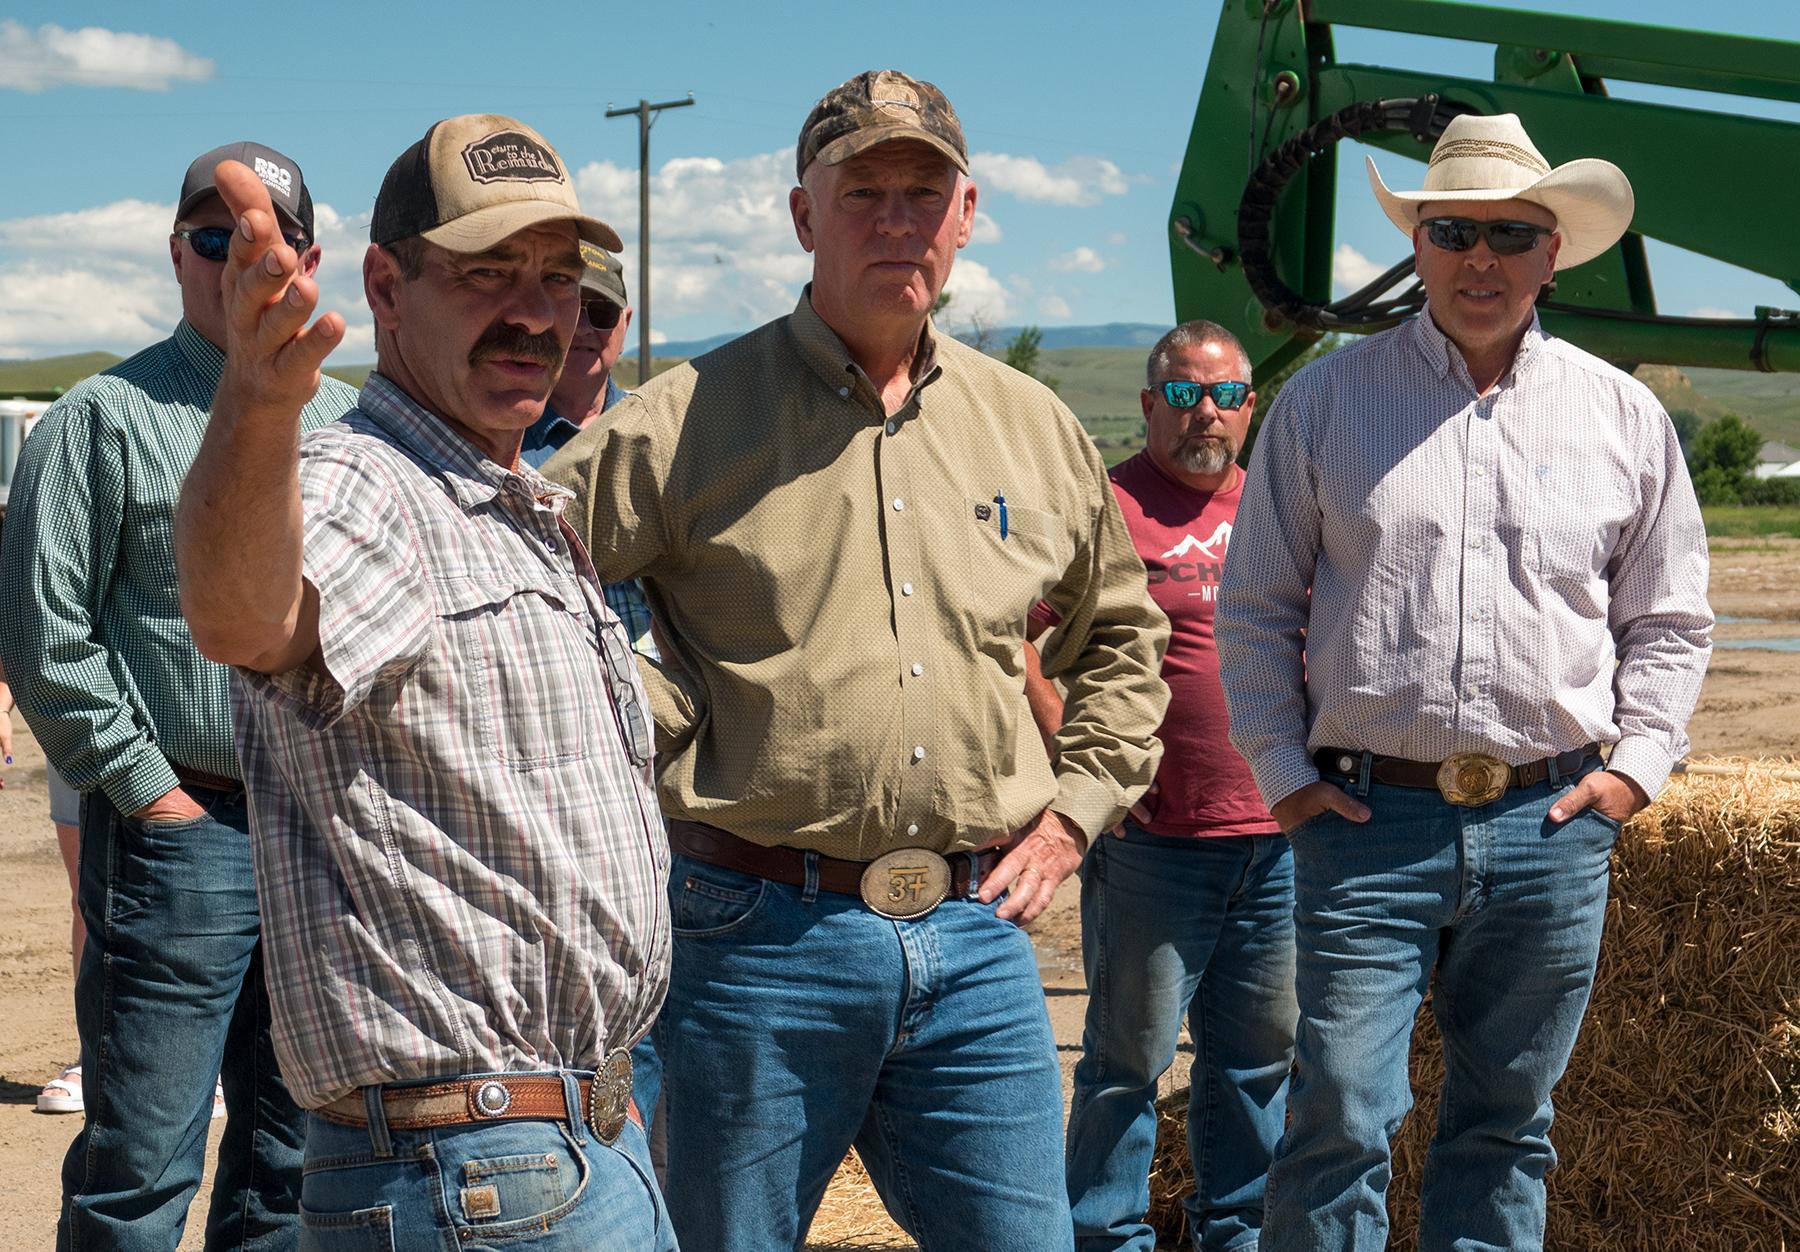 Rancher screen left pointing, Governor and Commissioner in photo. Heavy equipment in background.